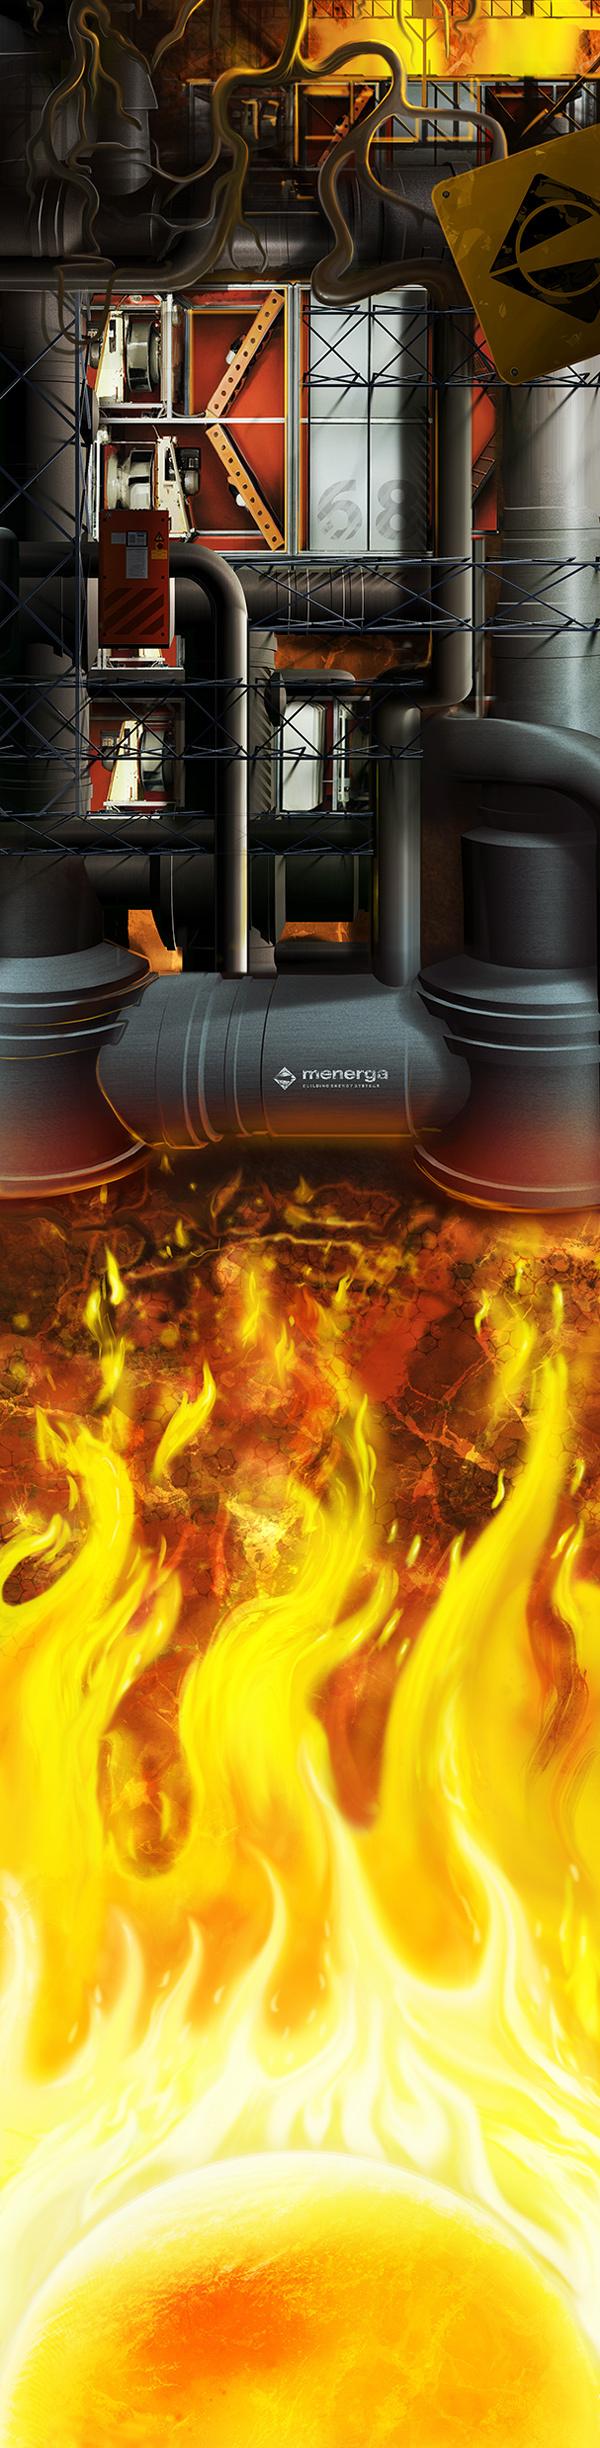 Menerga Energy System by David Fuhrer; photoshop resource collected by psd-dude.com from Behance Network